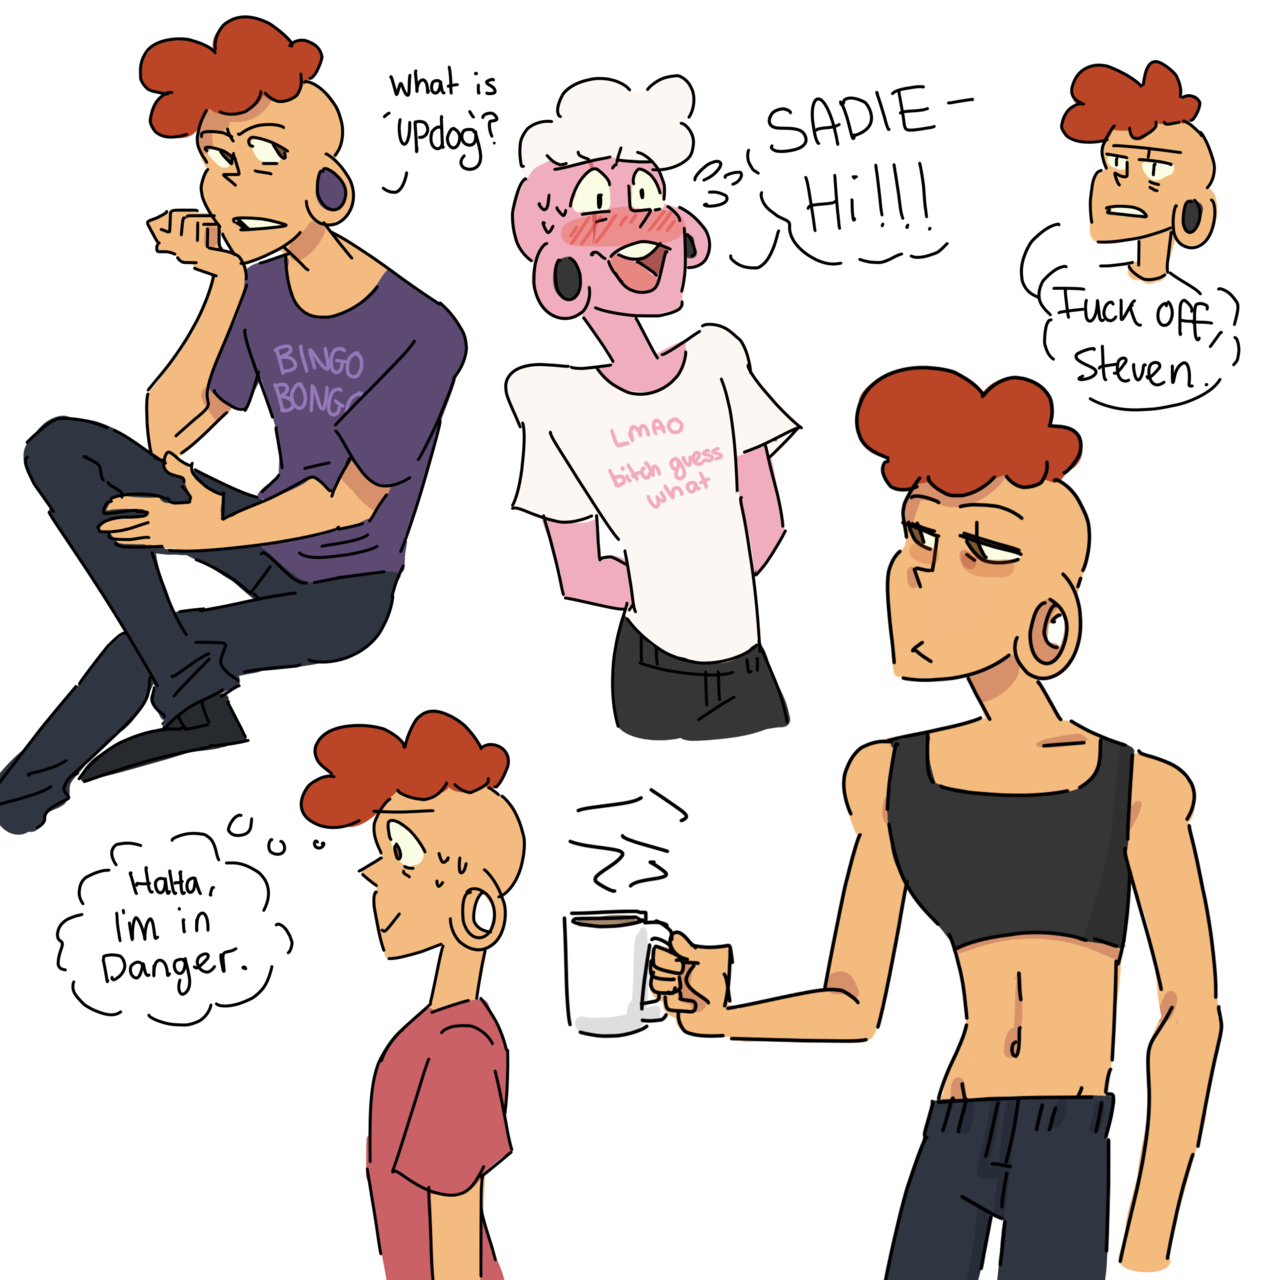 some Lars for the soul